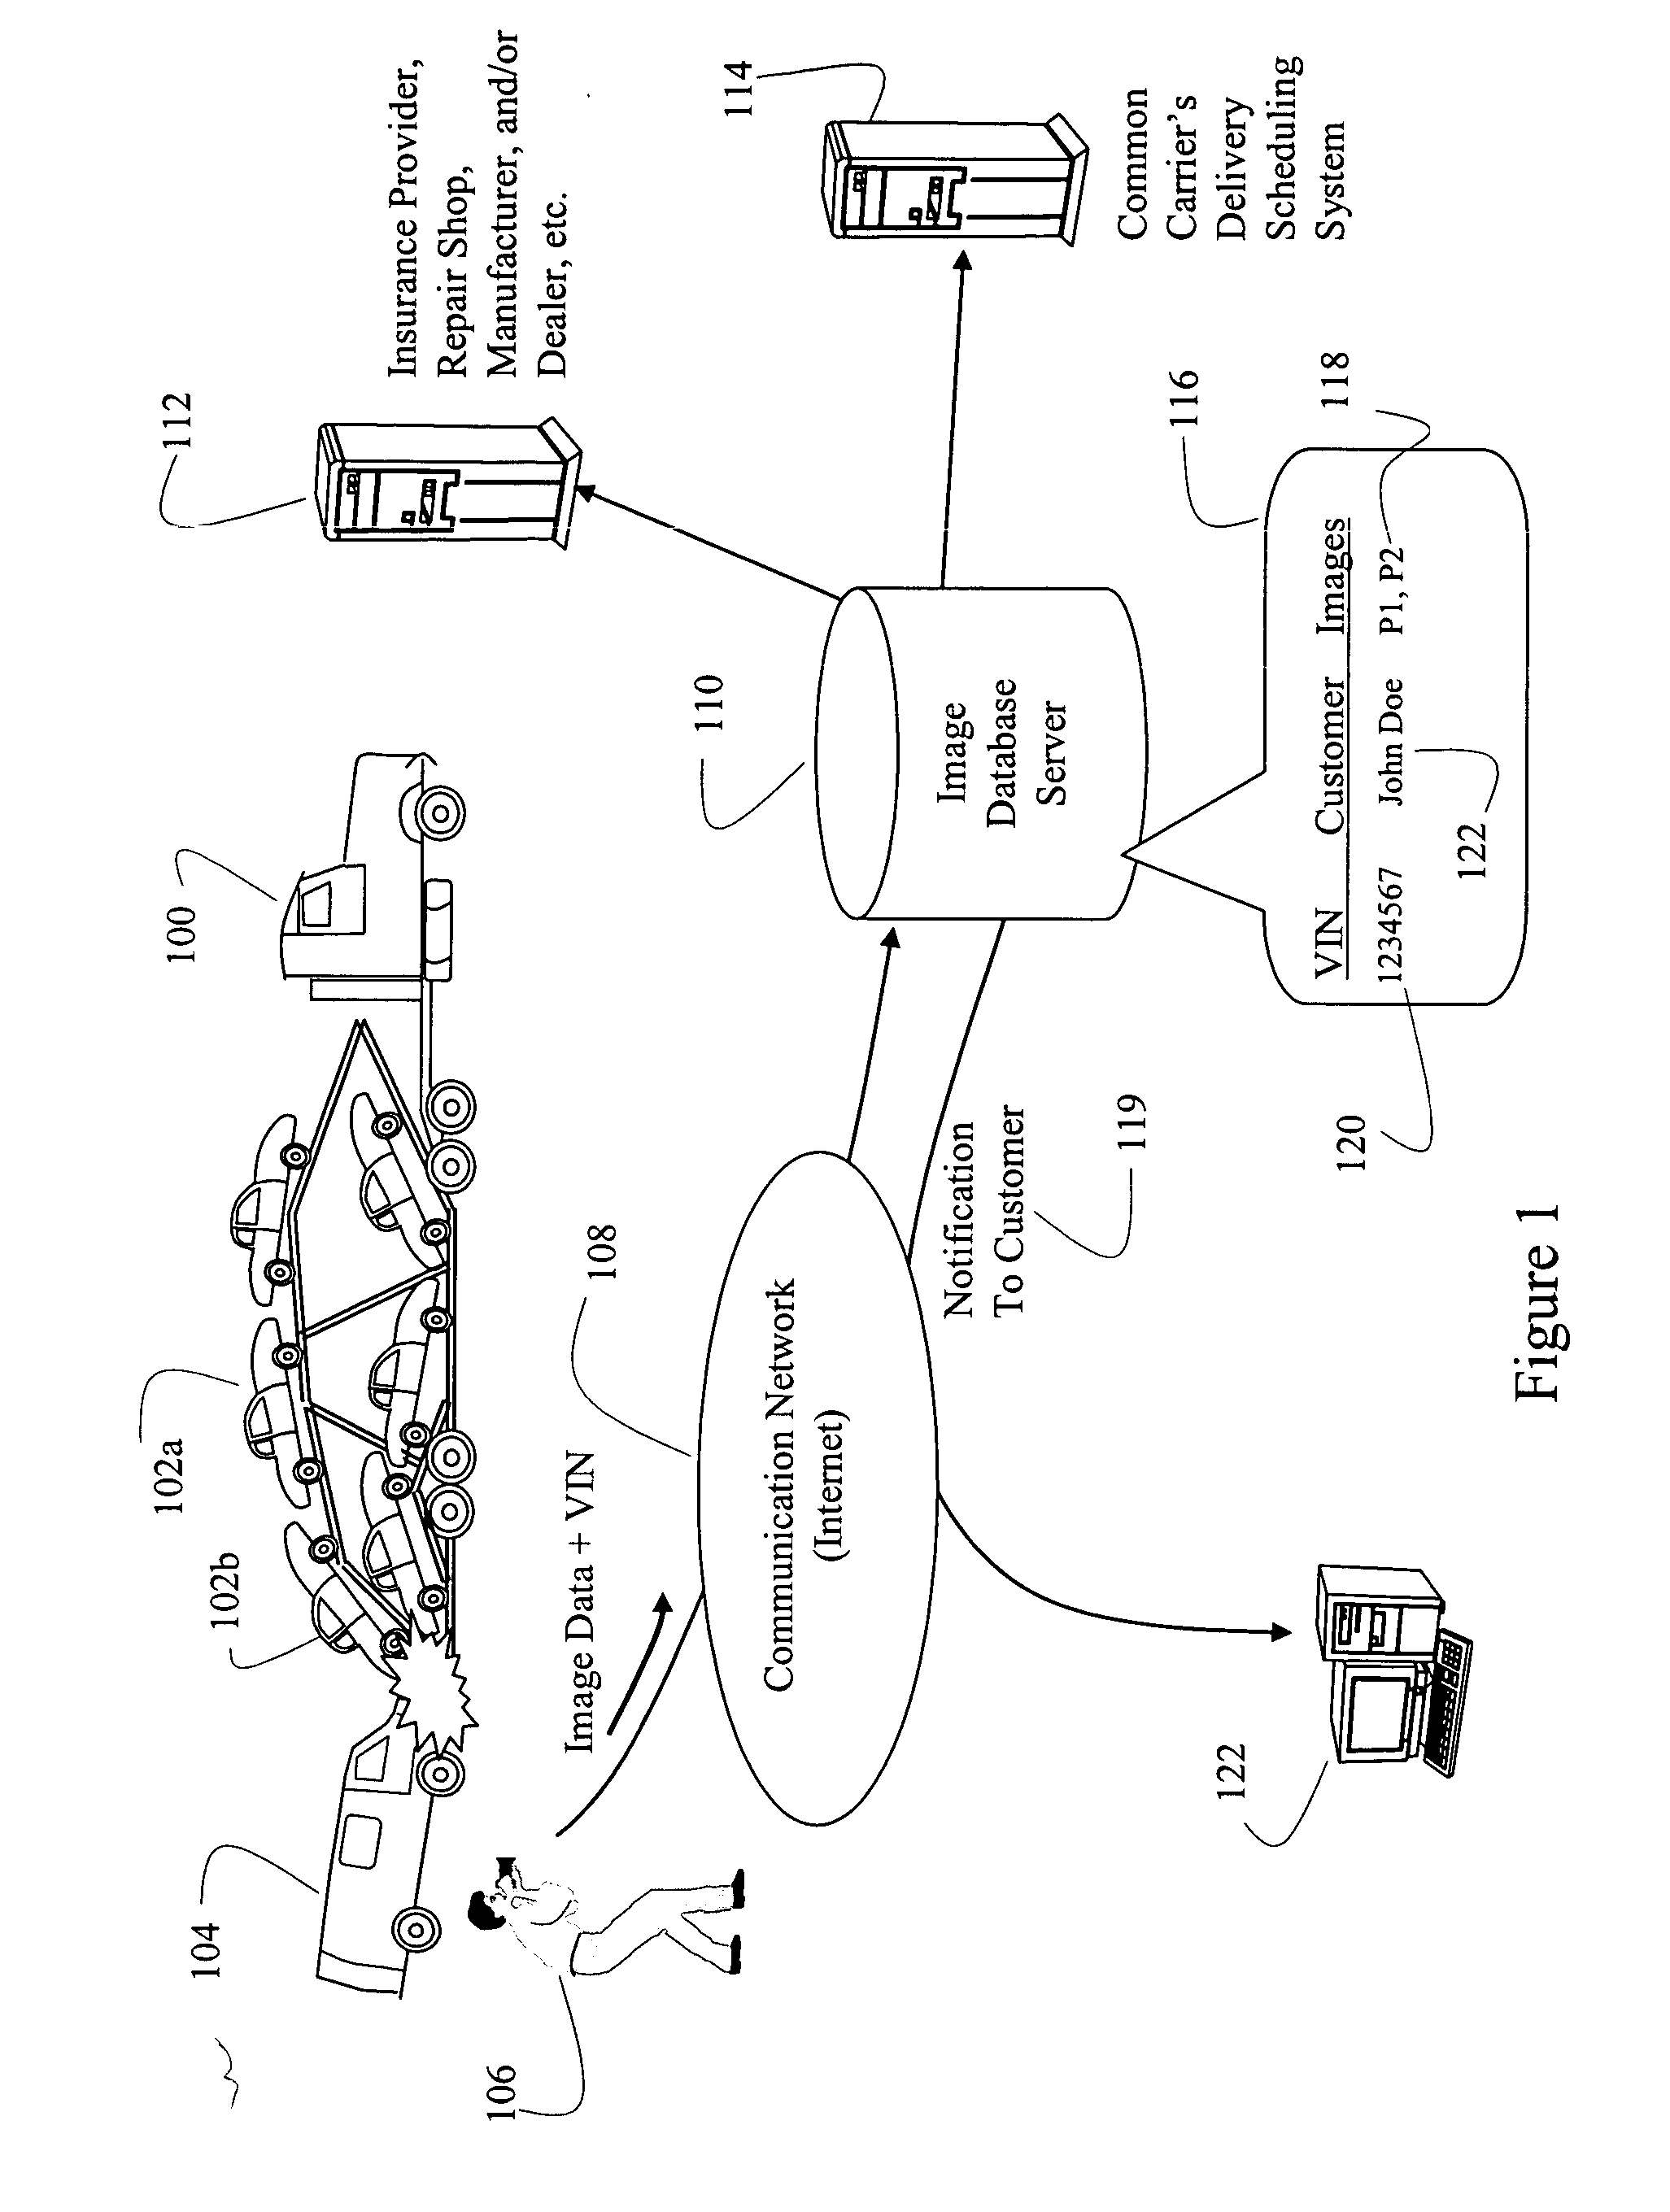 Systems and methods for providing a digital image and disposition of a delivered good